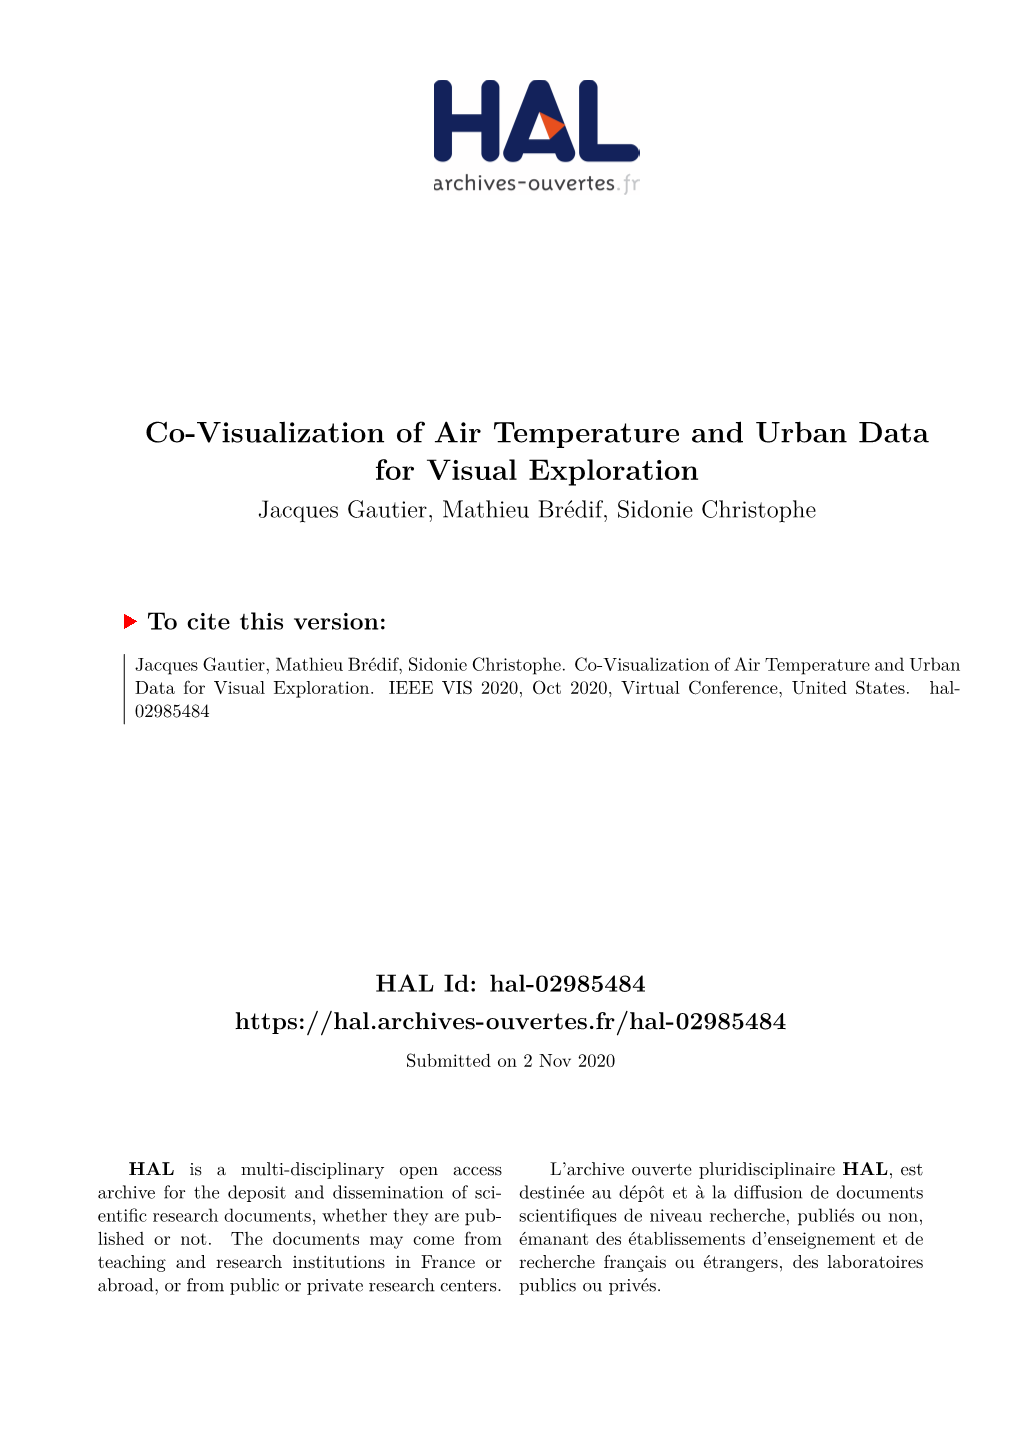 Co-Visualization of Air Temperature and Urban Data for Visual Exploration Jacques Gautier, Mathieu Brédif, Sidonie Christophe